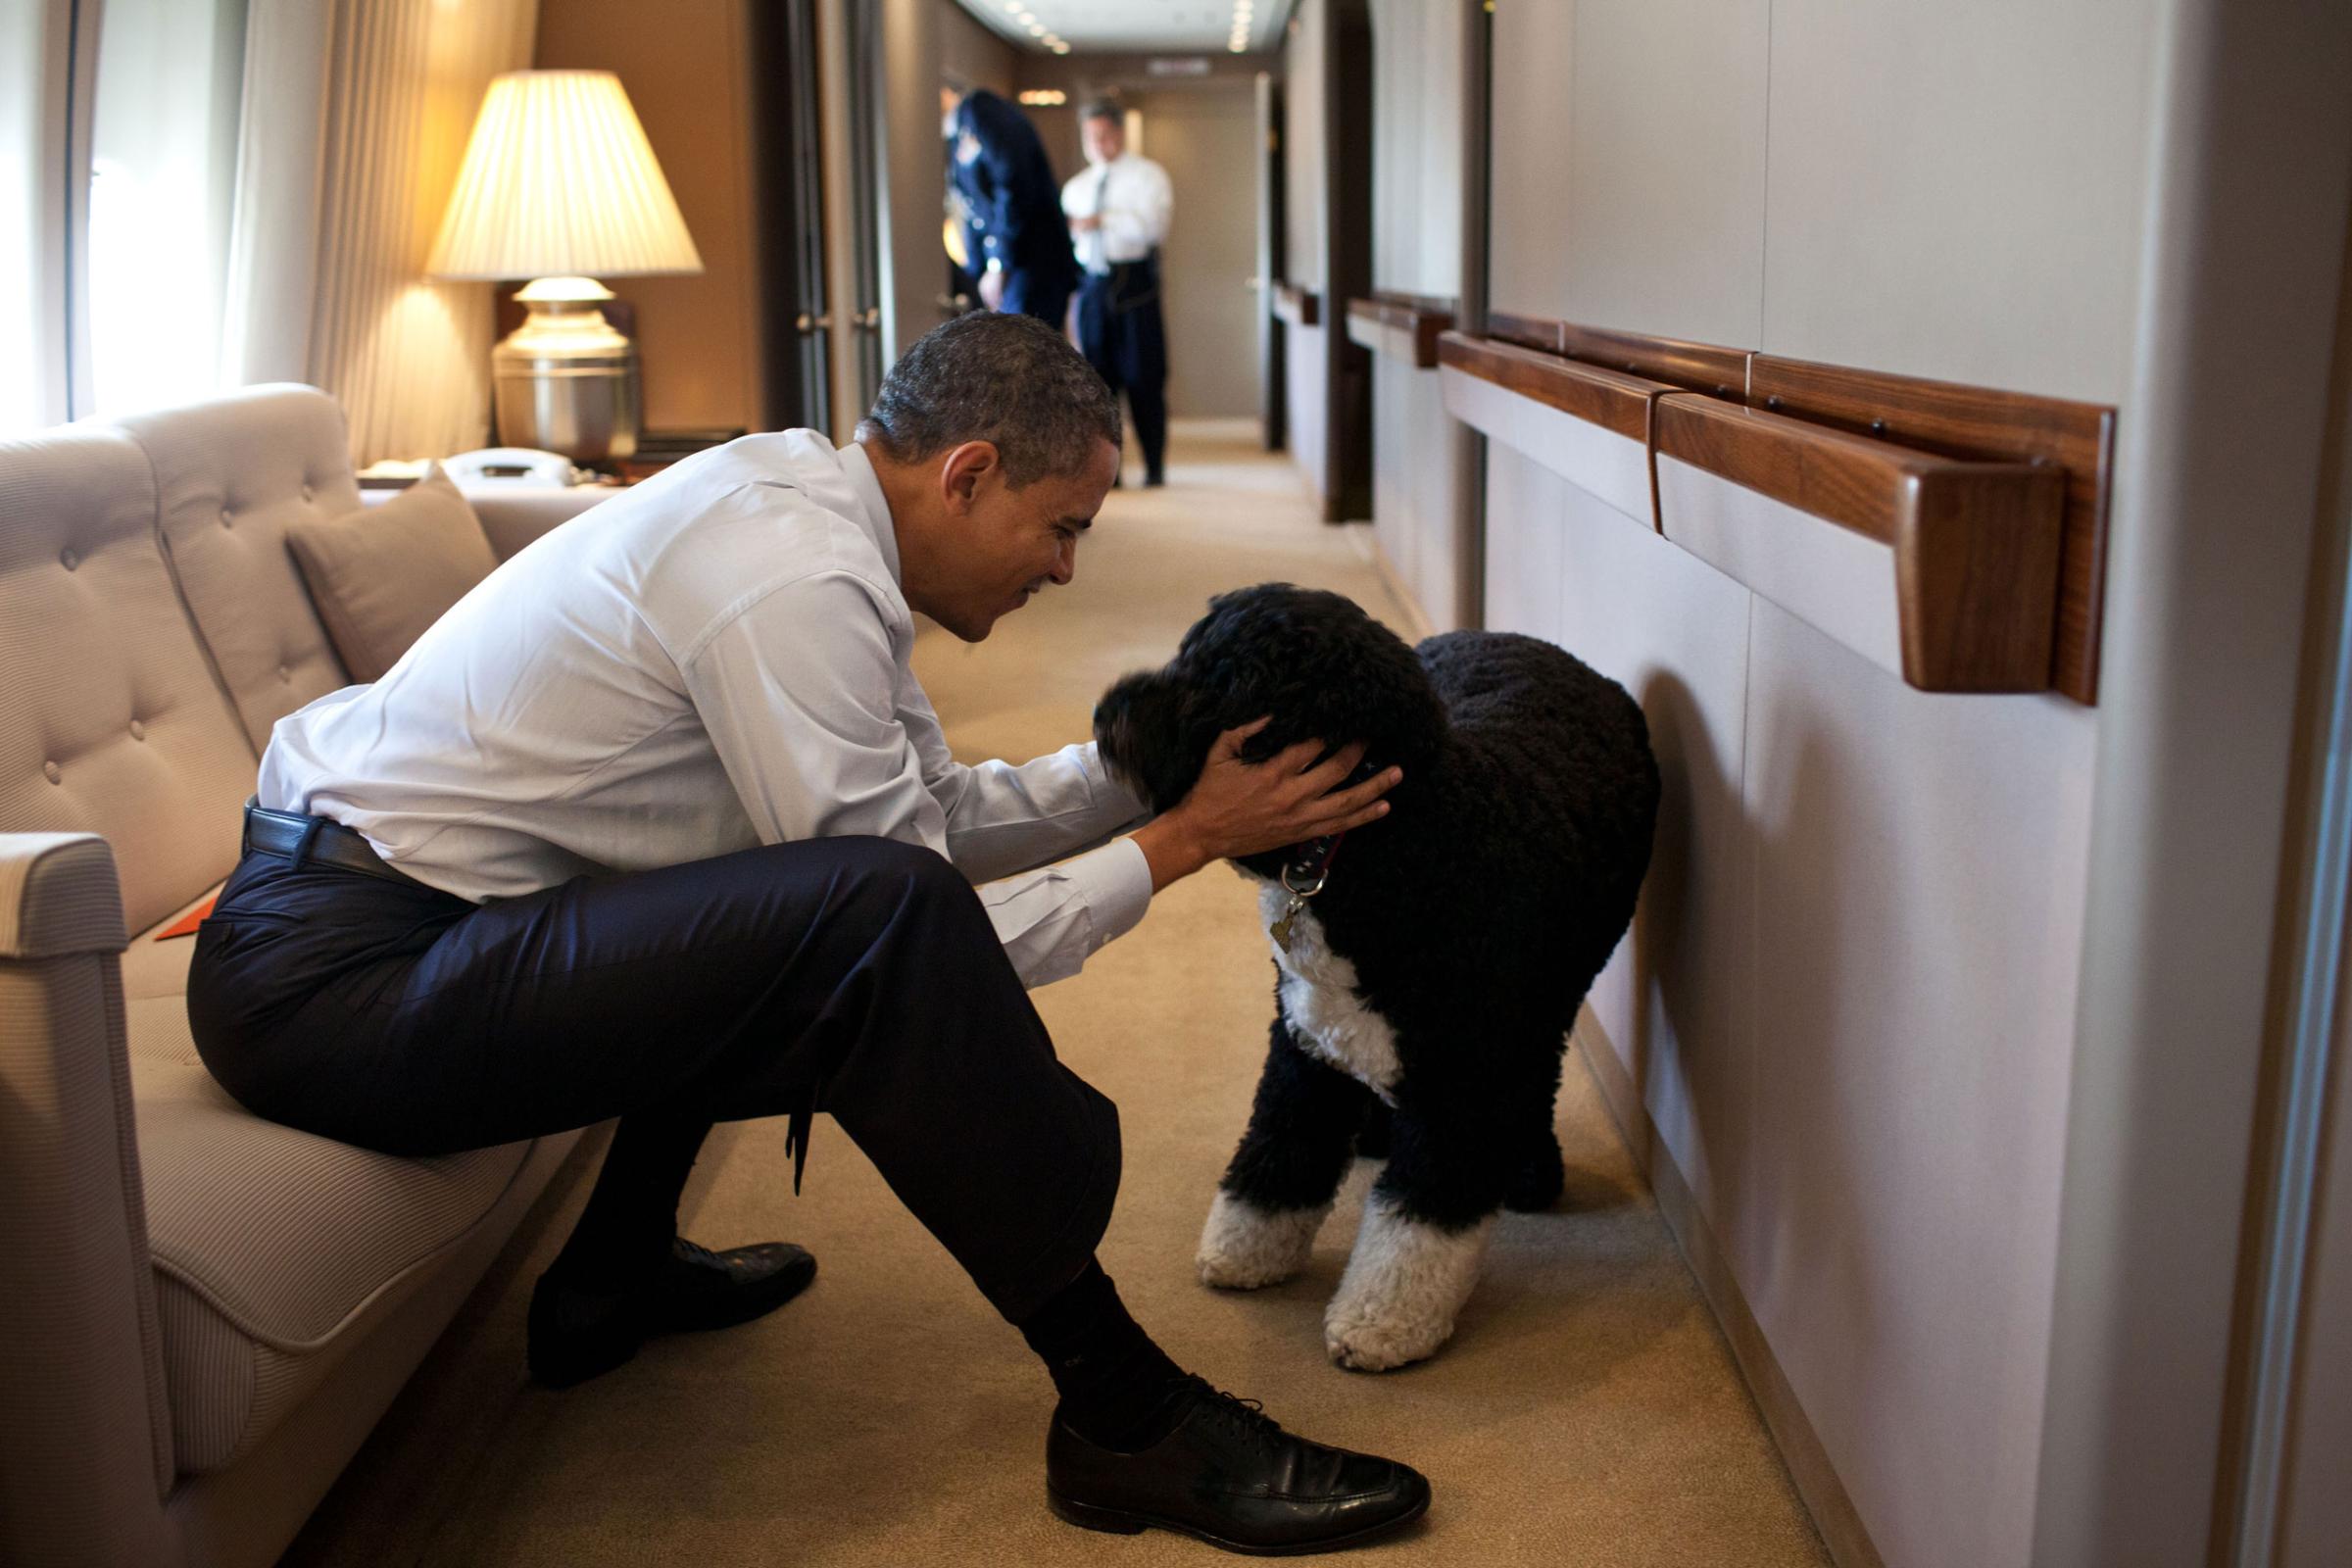 President Barack Obama plays with Bo, the Obama family dog, aboard Air Force One during a flight to Hawaii, Dec. 23, 2011.